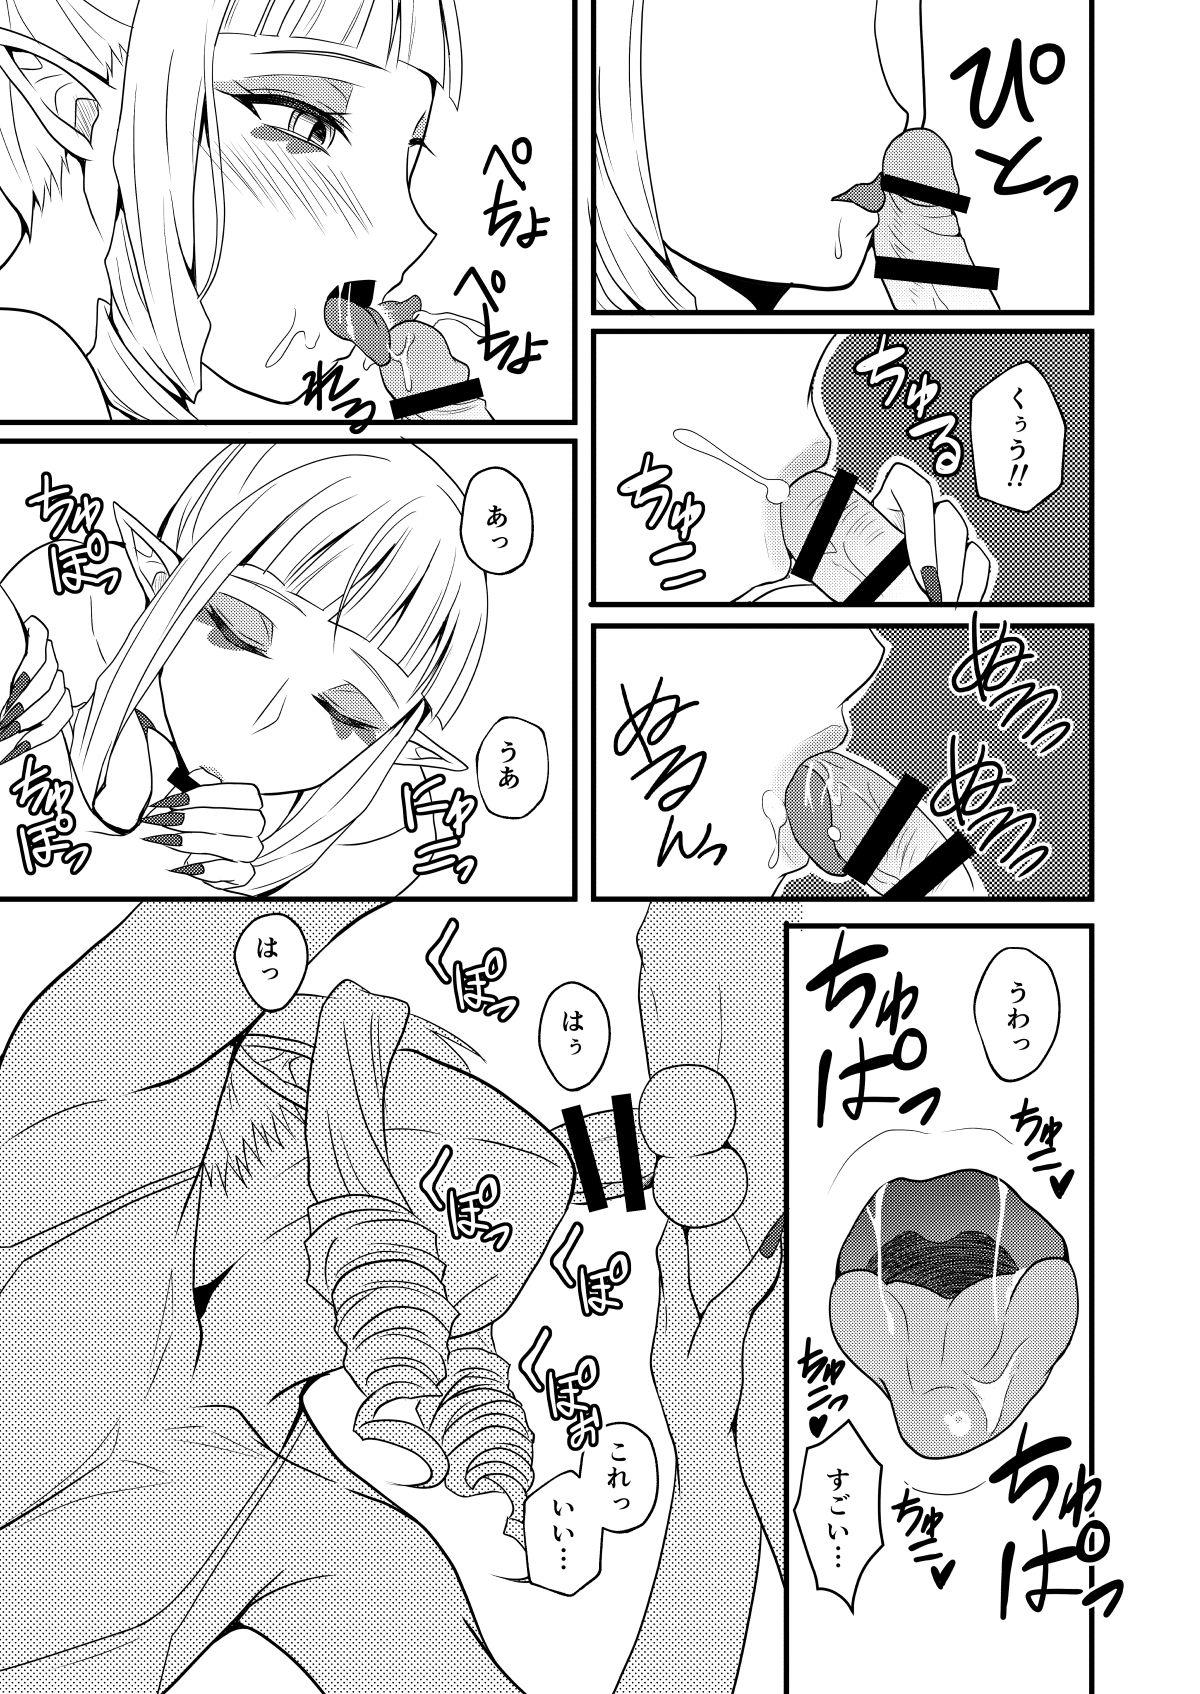 Suckingcock Off-white Sibling Filming - Go princess precure Blowjobs - Page 8